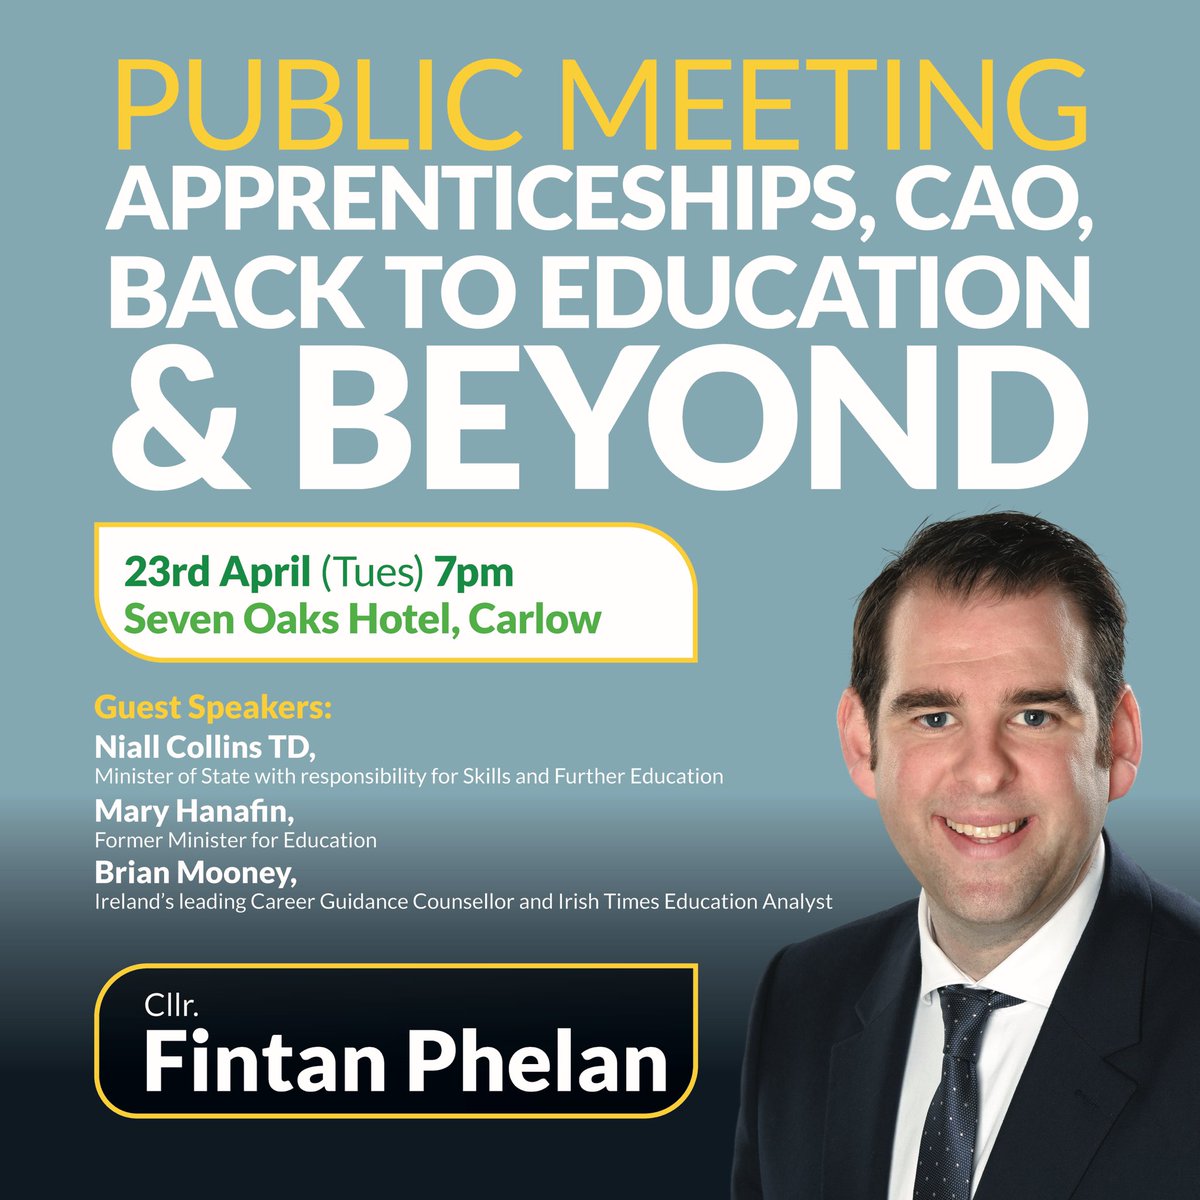 Please join me next Tuesday evening 23rd of April for a public meeting on education with special guest speakers @NiallCollinsTD @brianmooney20 @MaryHanafin1 ! #carlow #YourCouncillorOurCarlow #careeradvice